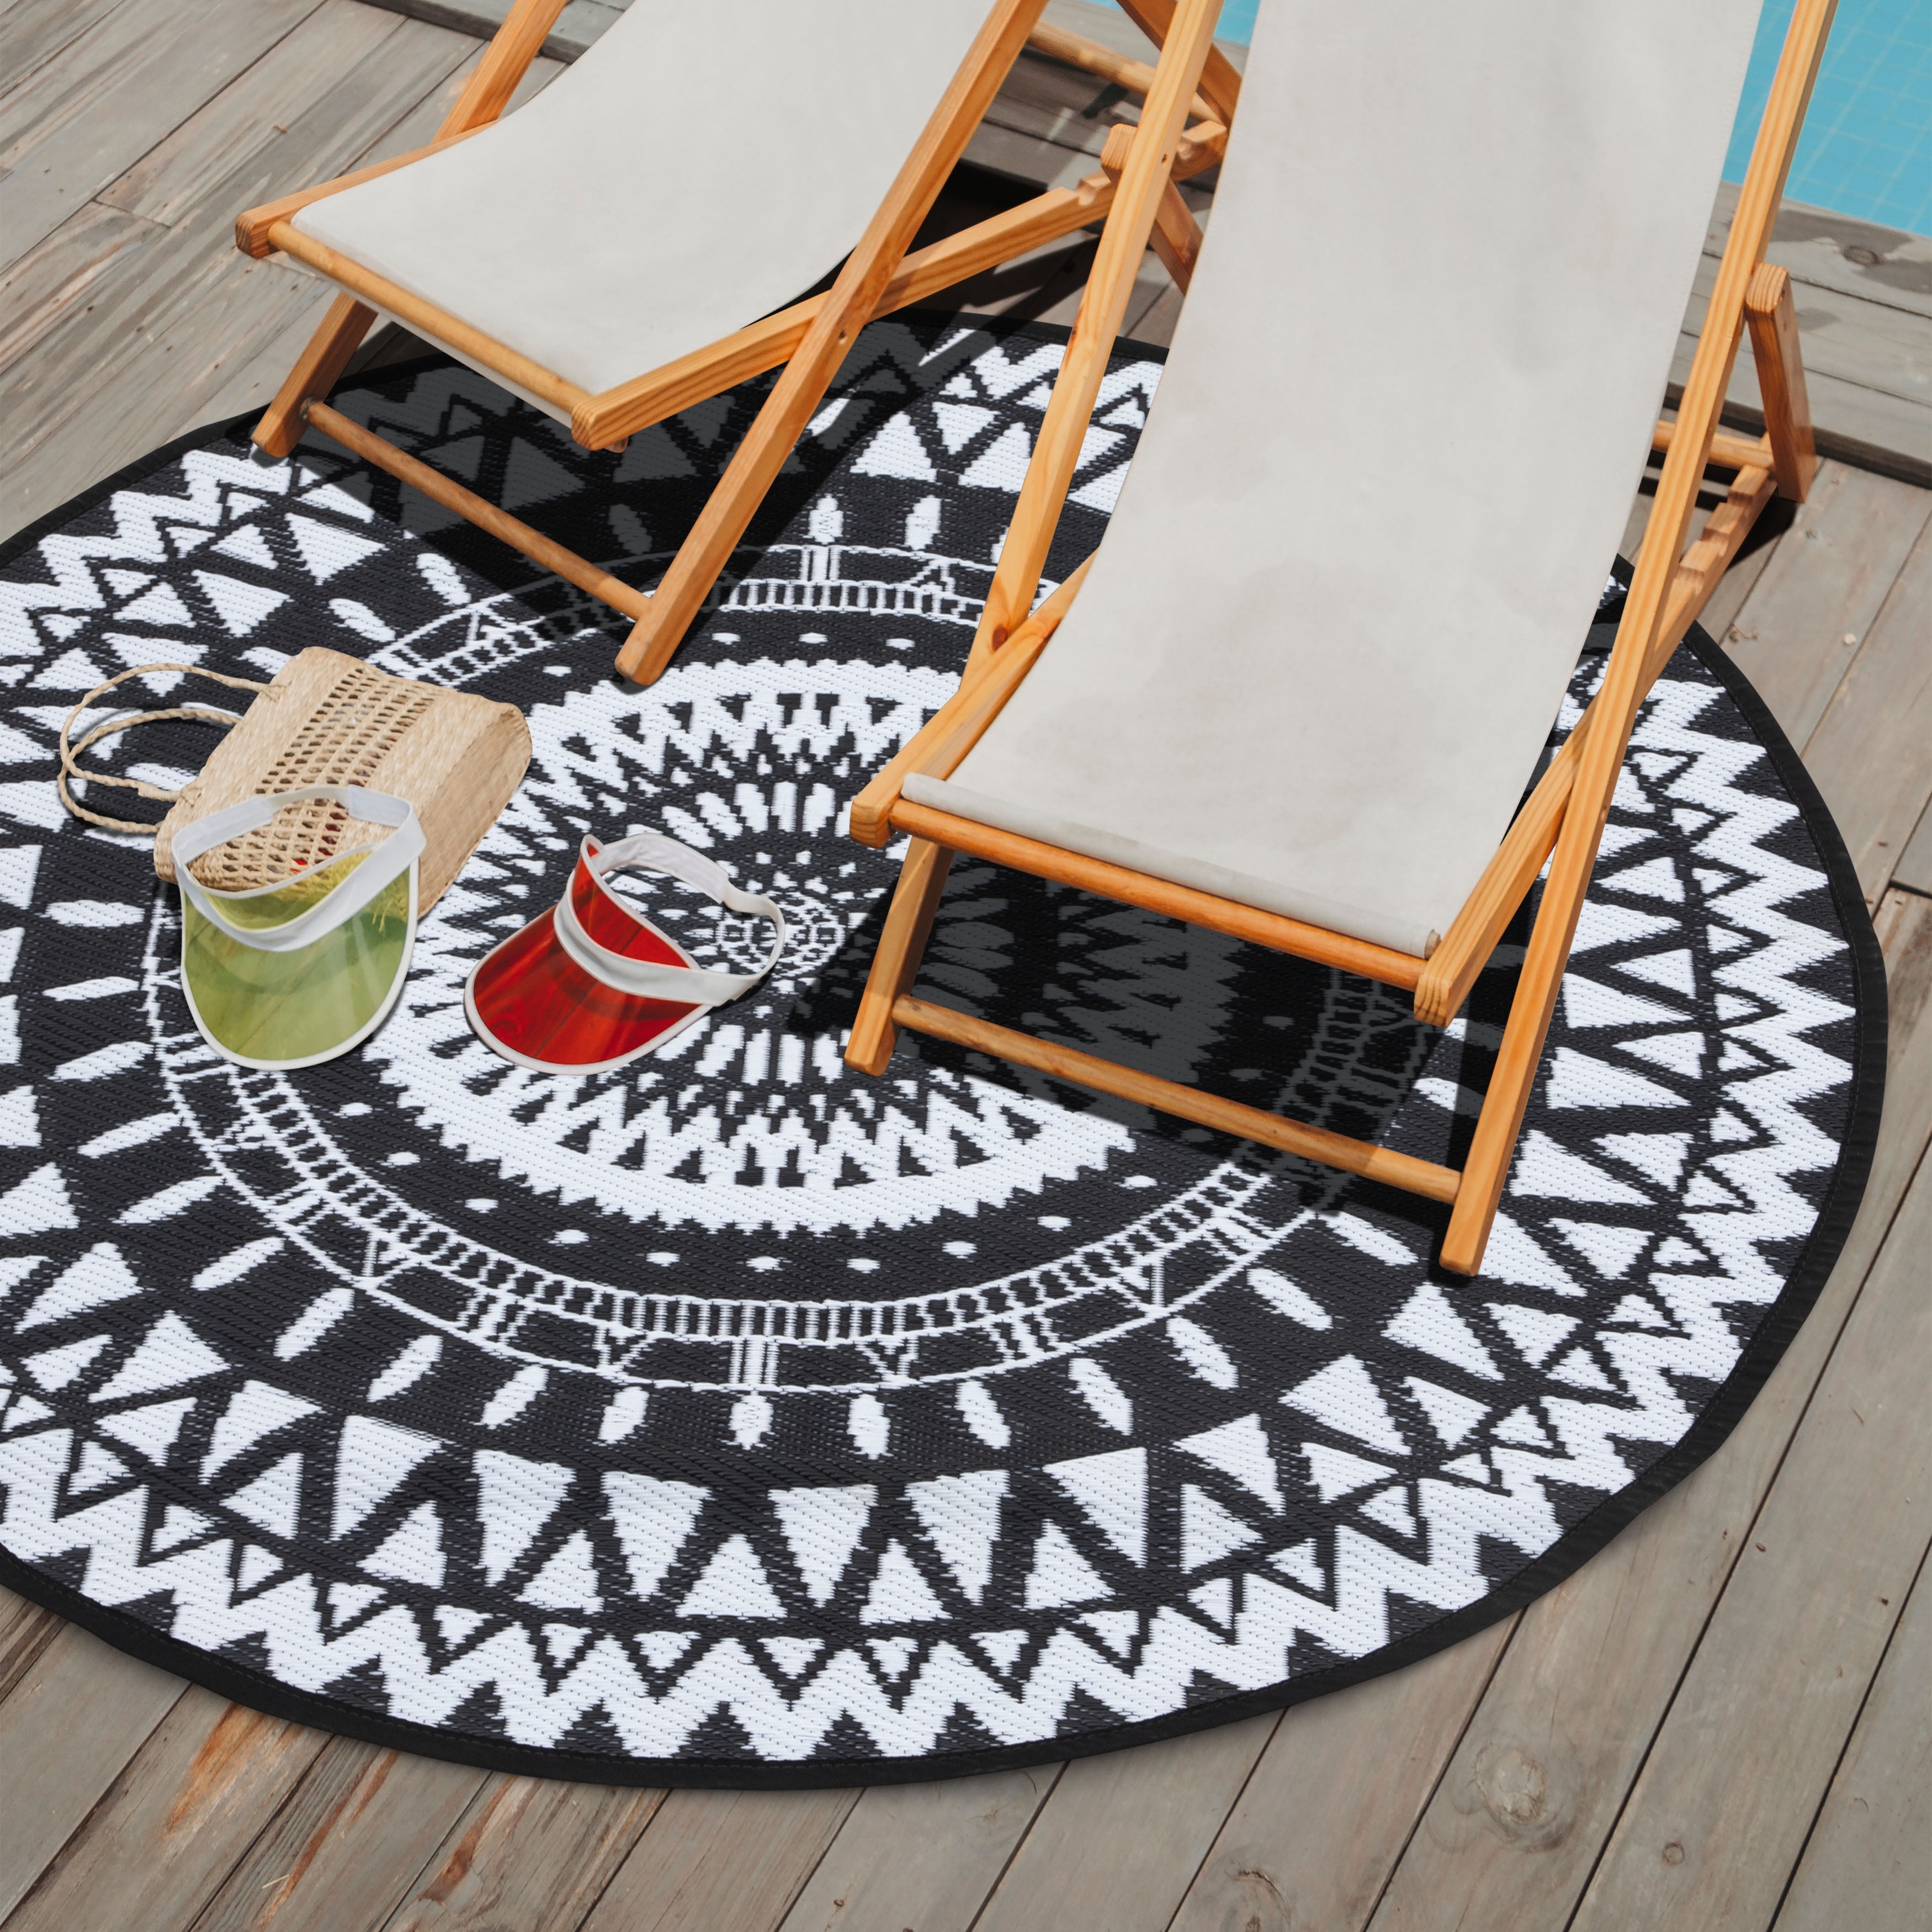 EA ADVANCE Reversible Mats Outdoor Rugs Plastic Straw Rug Indoor Area Rug  Waterproof Large Floor Mats and Rugs for Camping RV Patio Backyard Deck